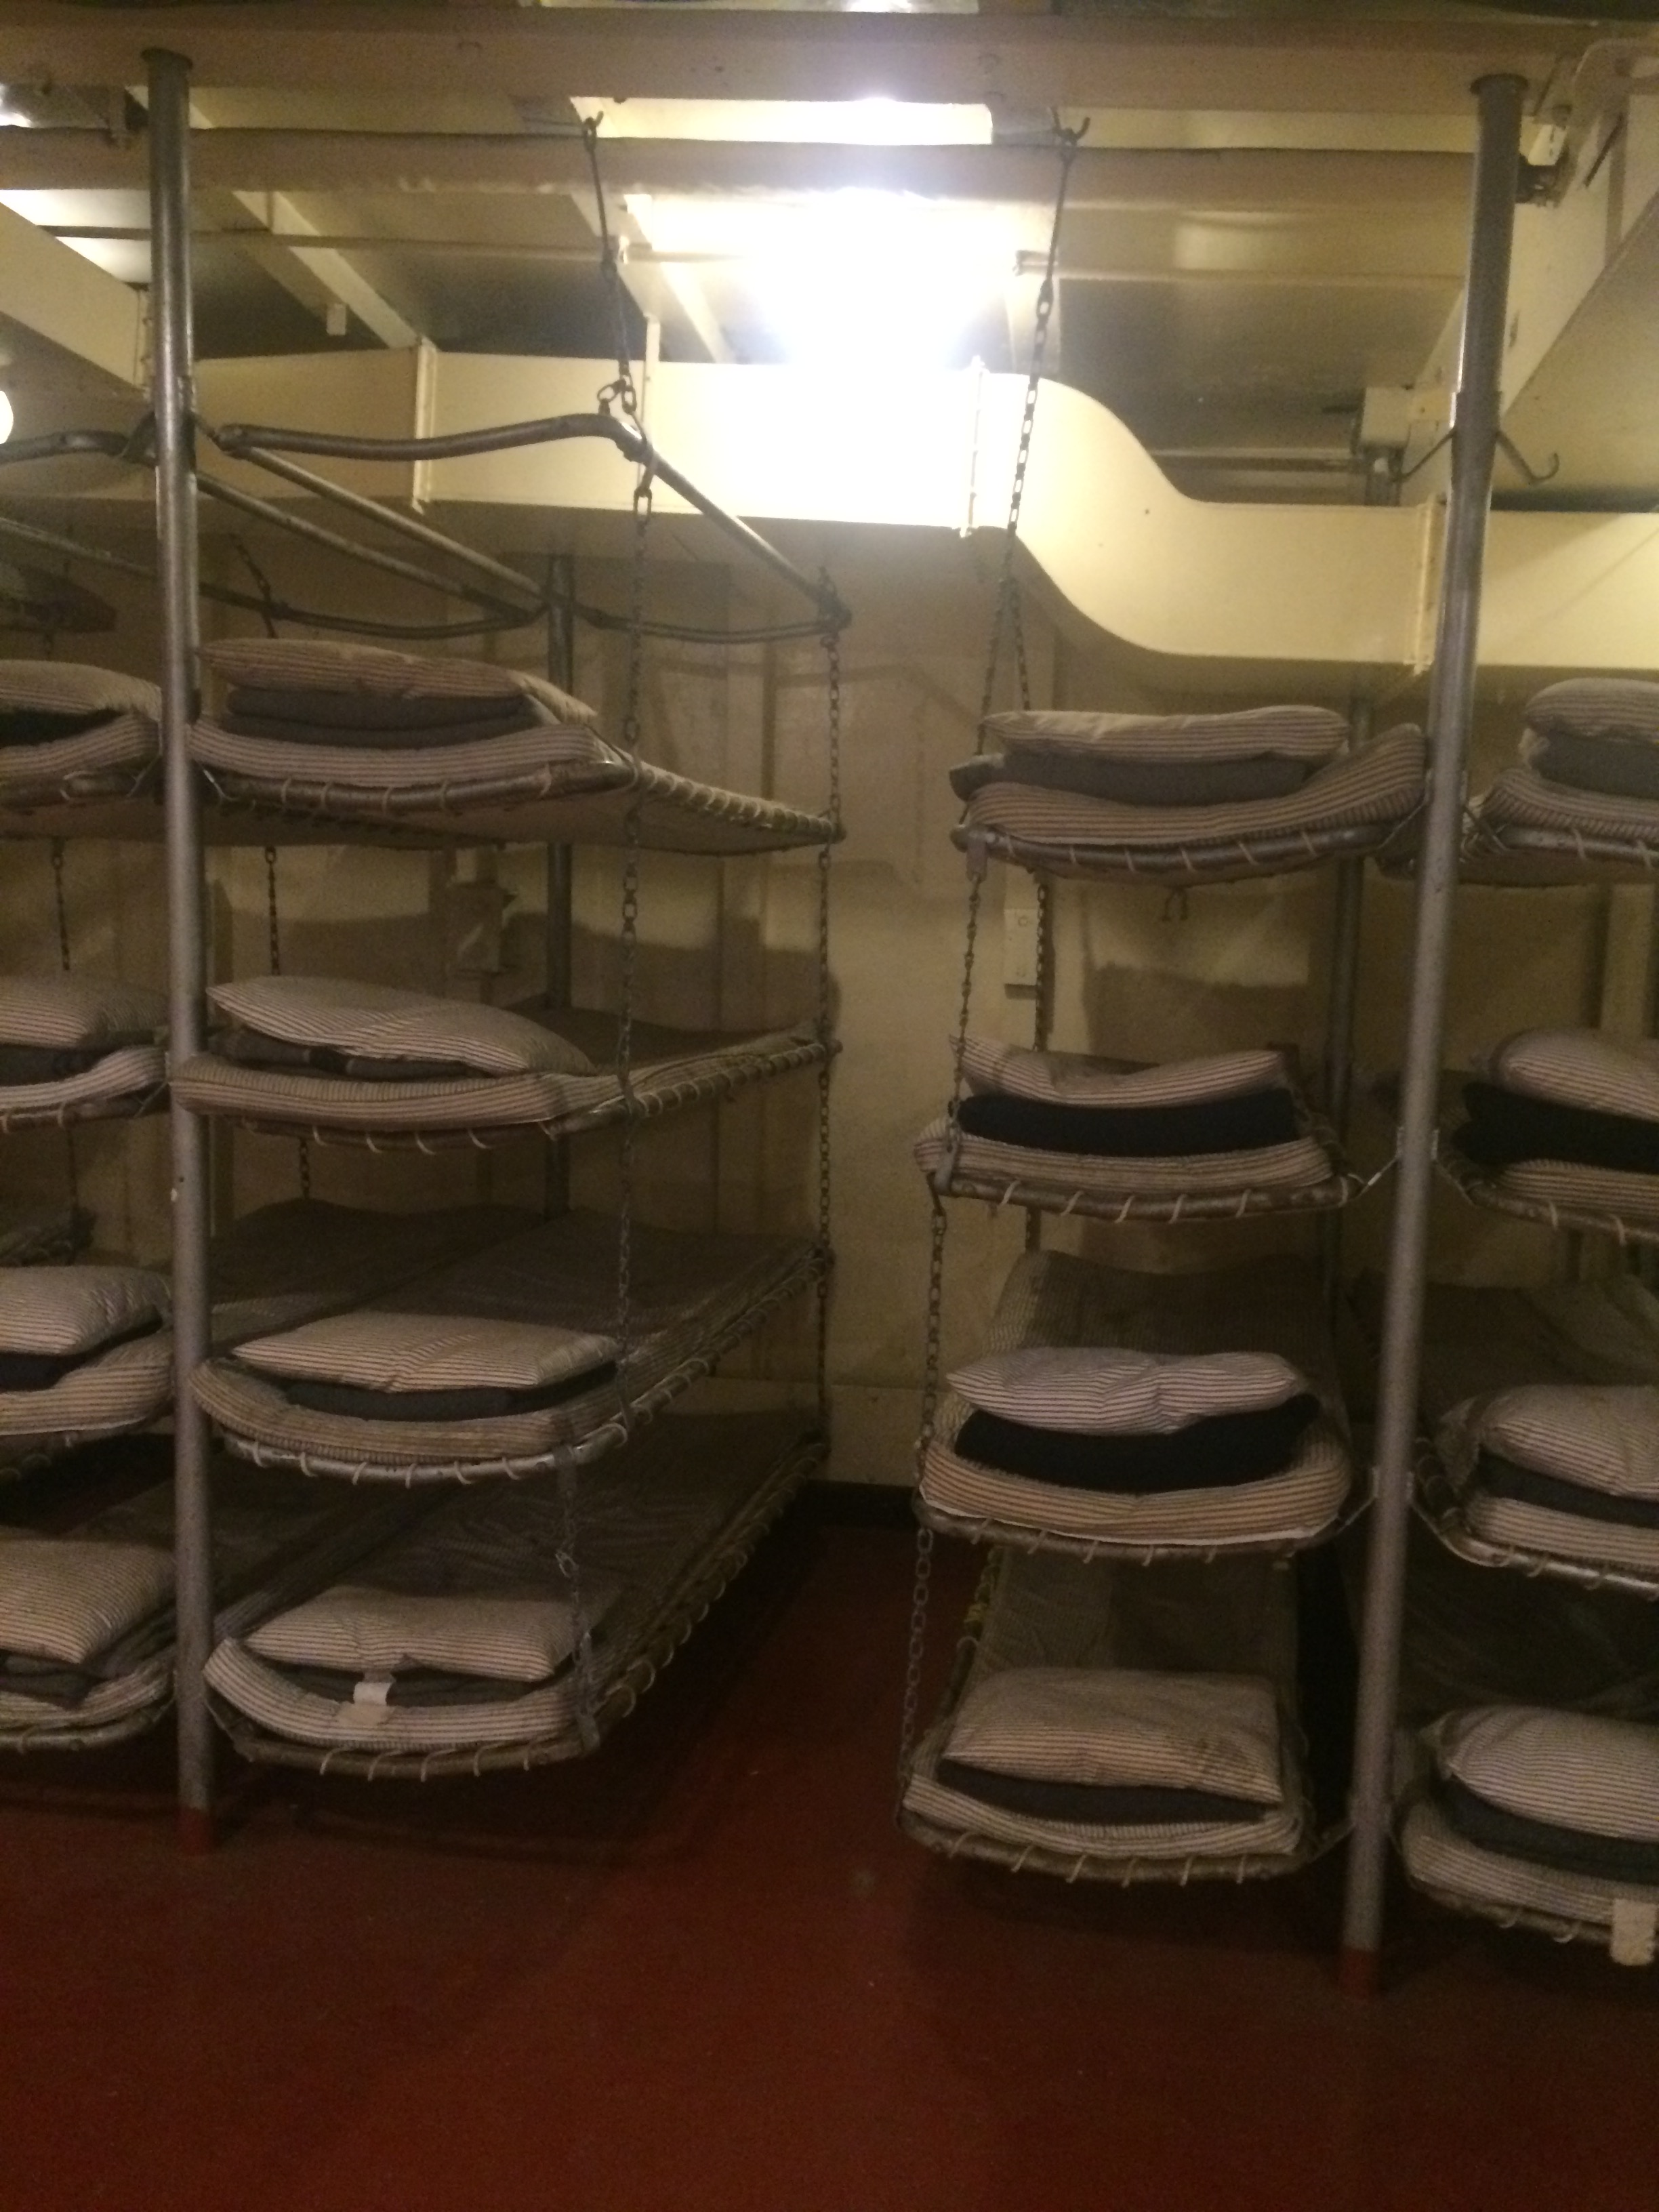 Troop bunks, stacked five high. 